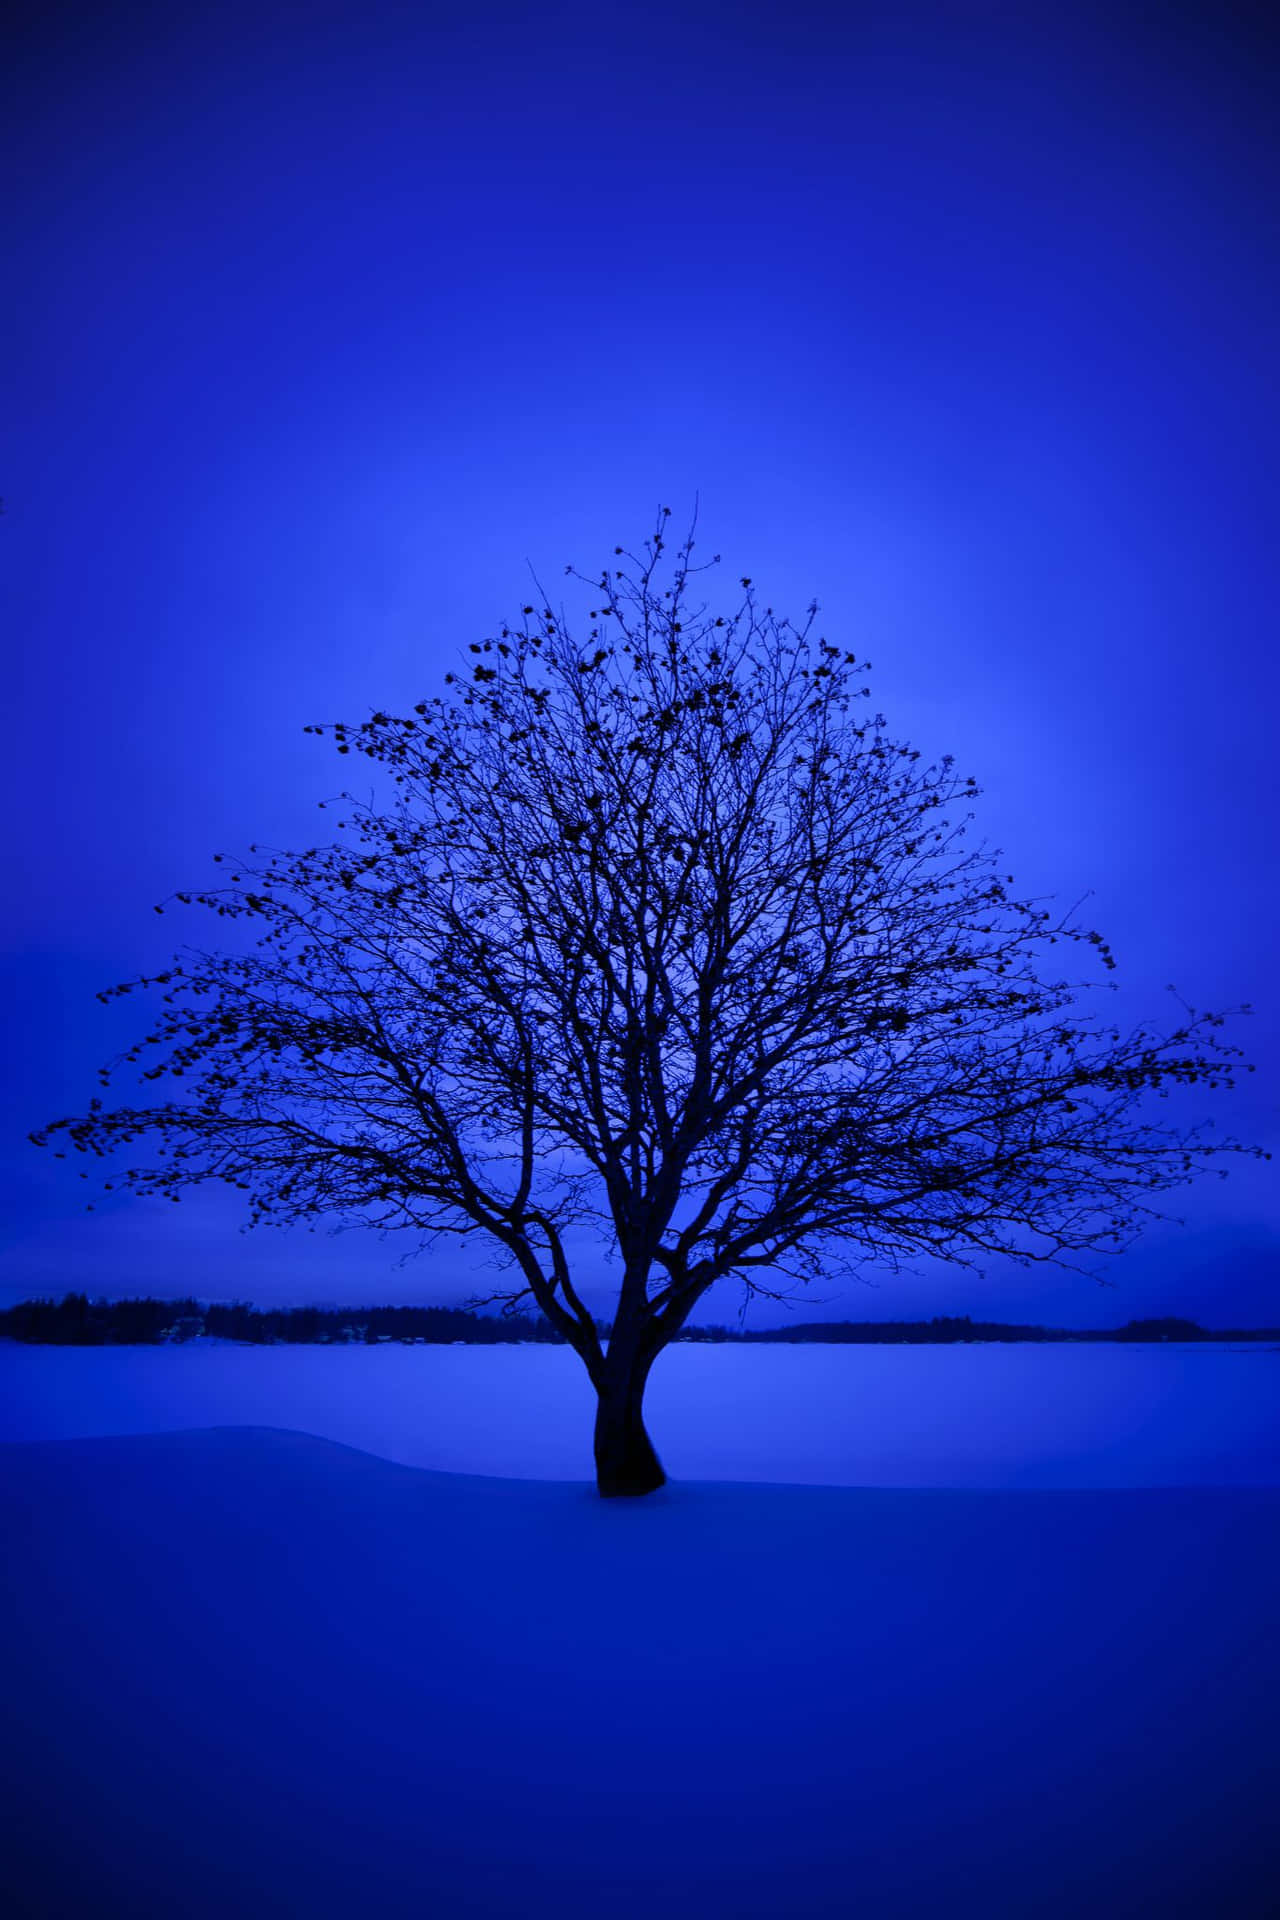 Enjoy the beauty of this blue aesthetic scene.